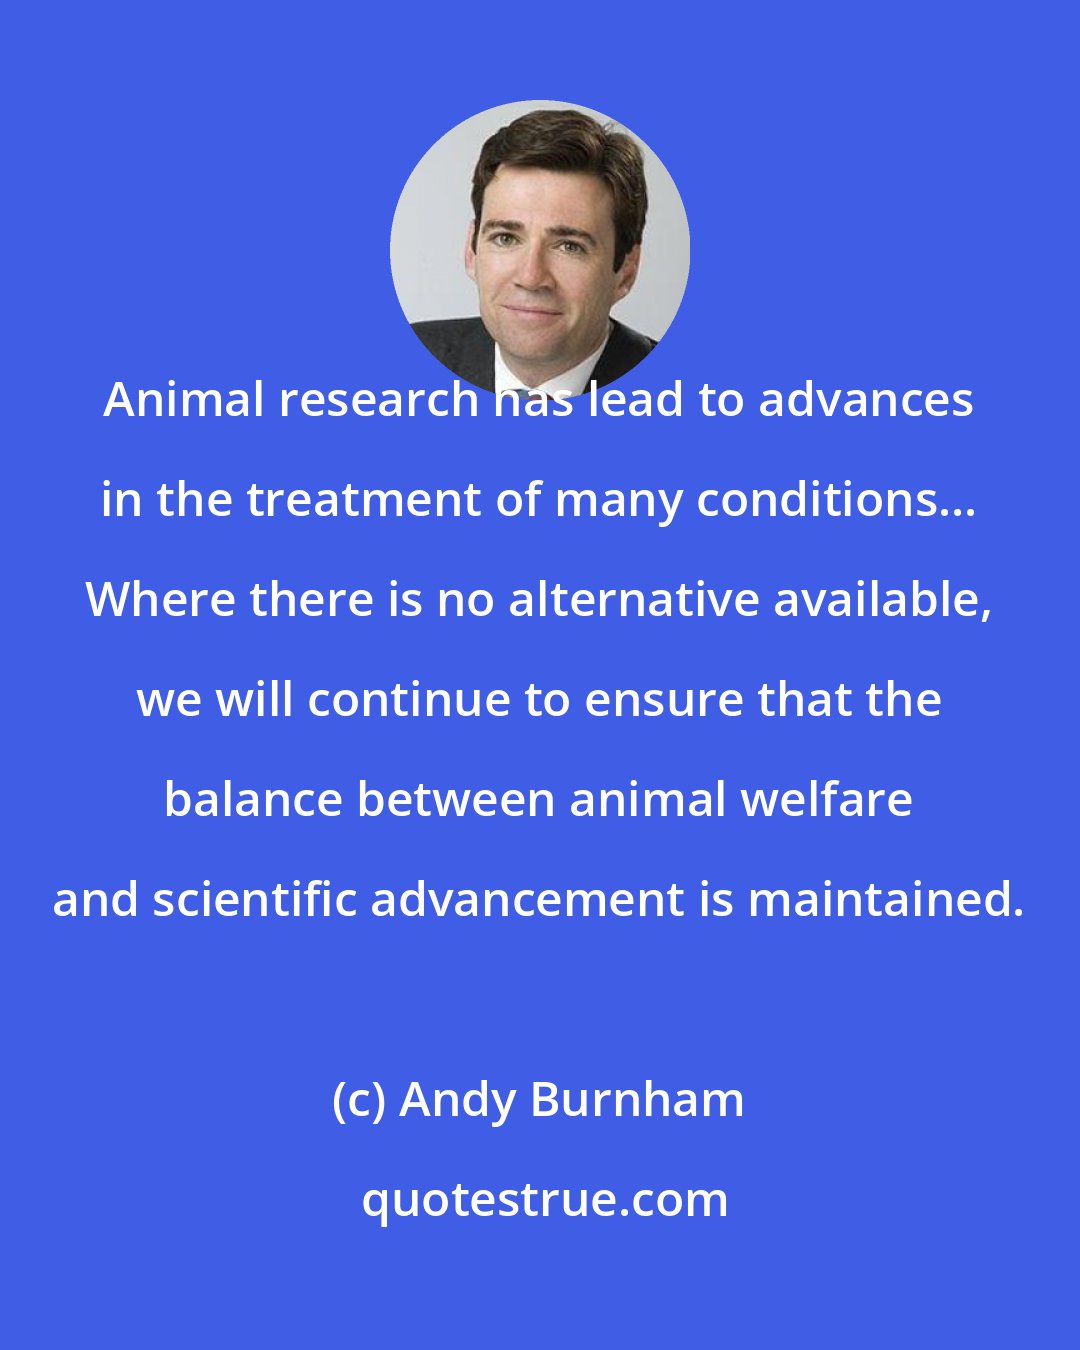 Andy Burnham: Animal research has lead to advances in the treatment of many conditions... Where there is no alternative available, we will continue to ensure that the balance between animal welfare and scientific advancement is maintained.